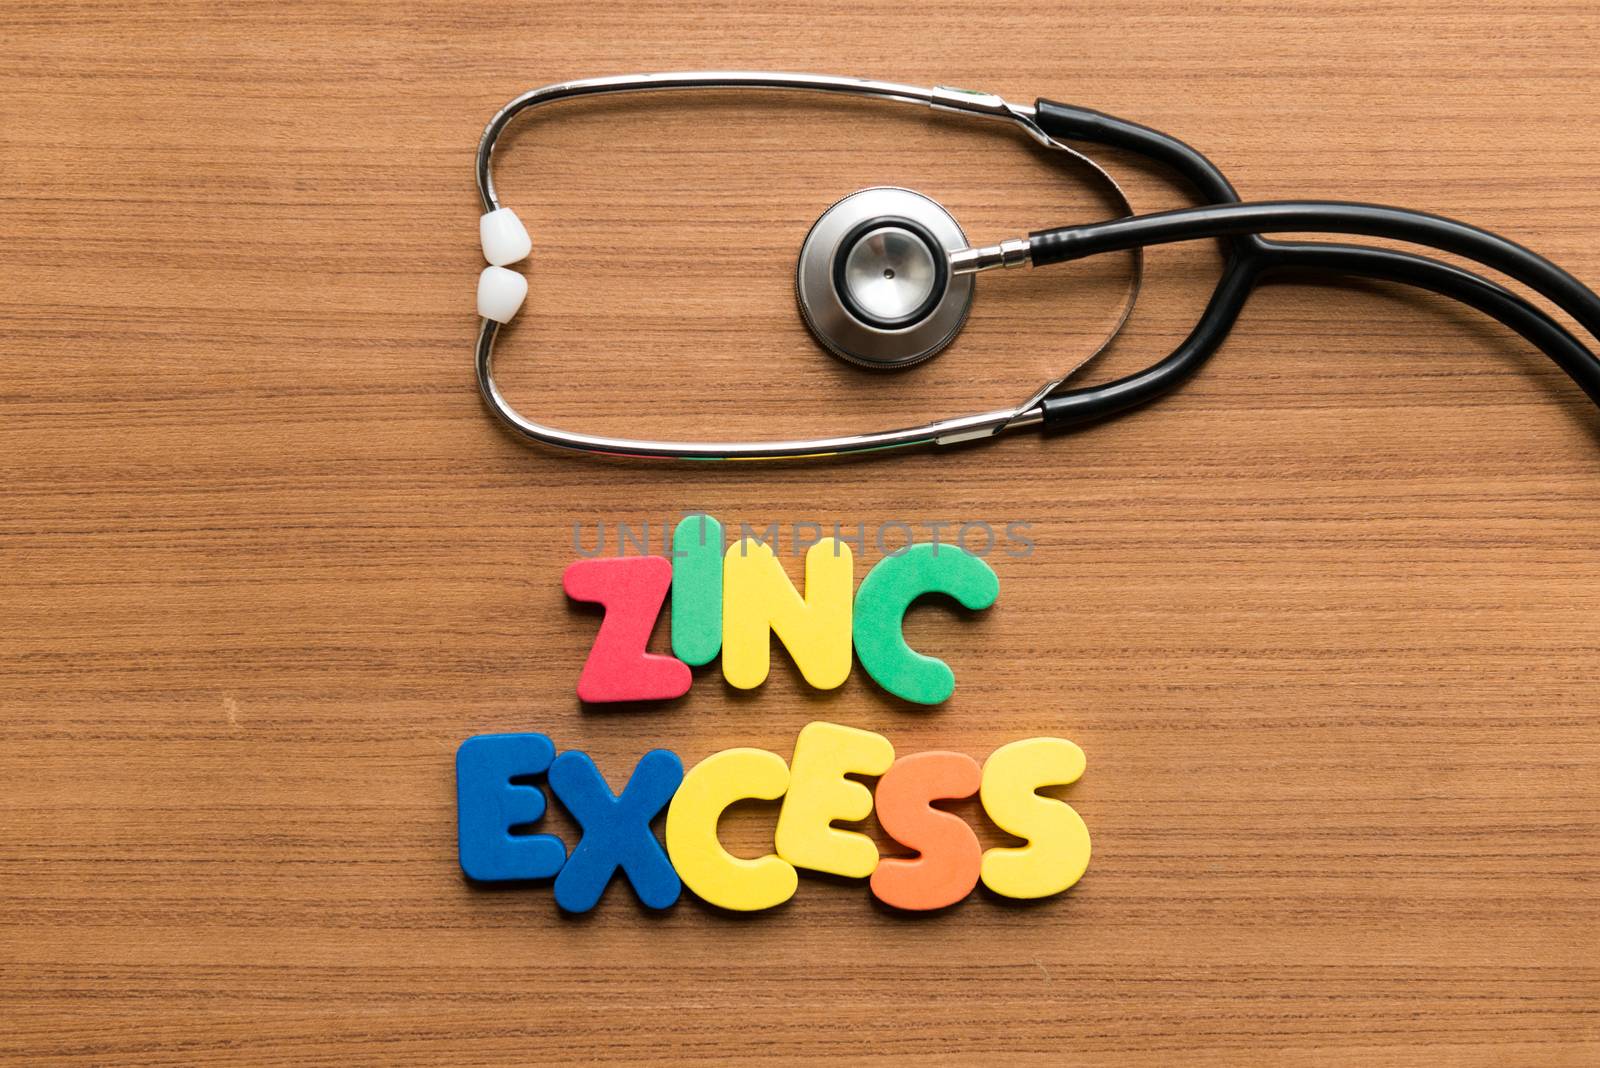 zinc excess colorful word with stethoscope on wooden background